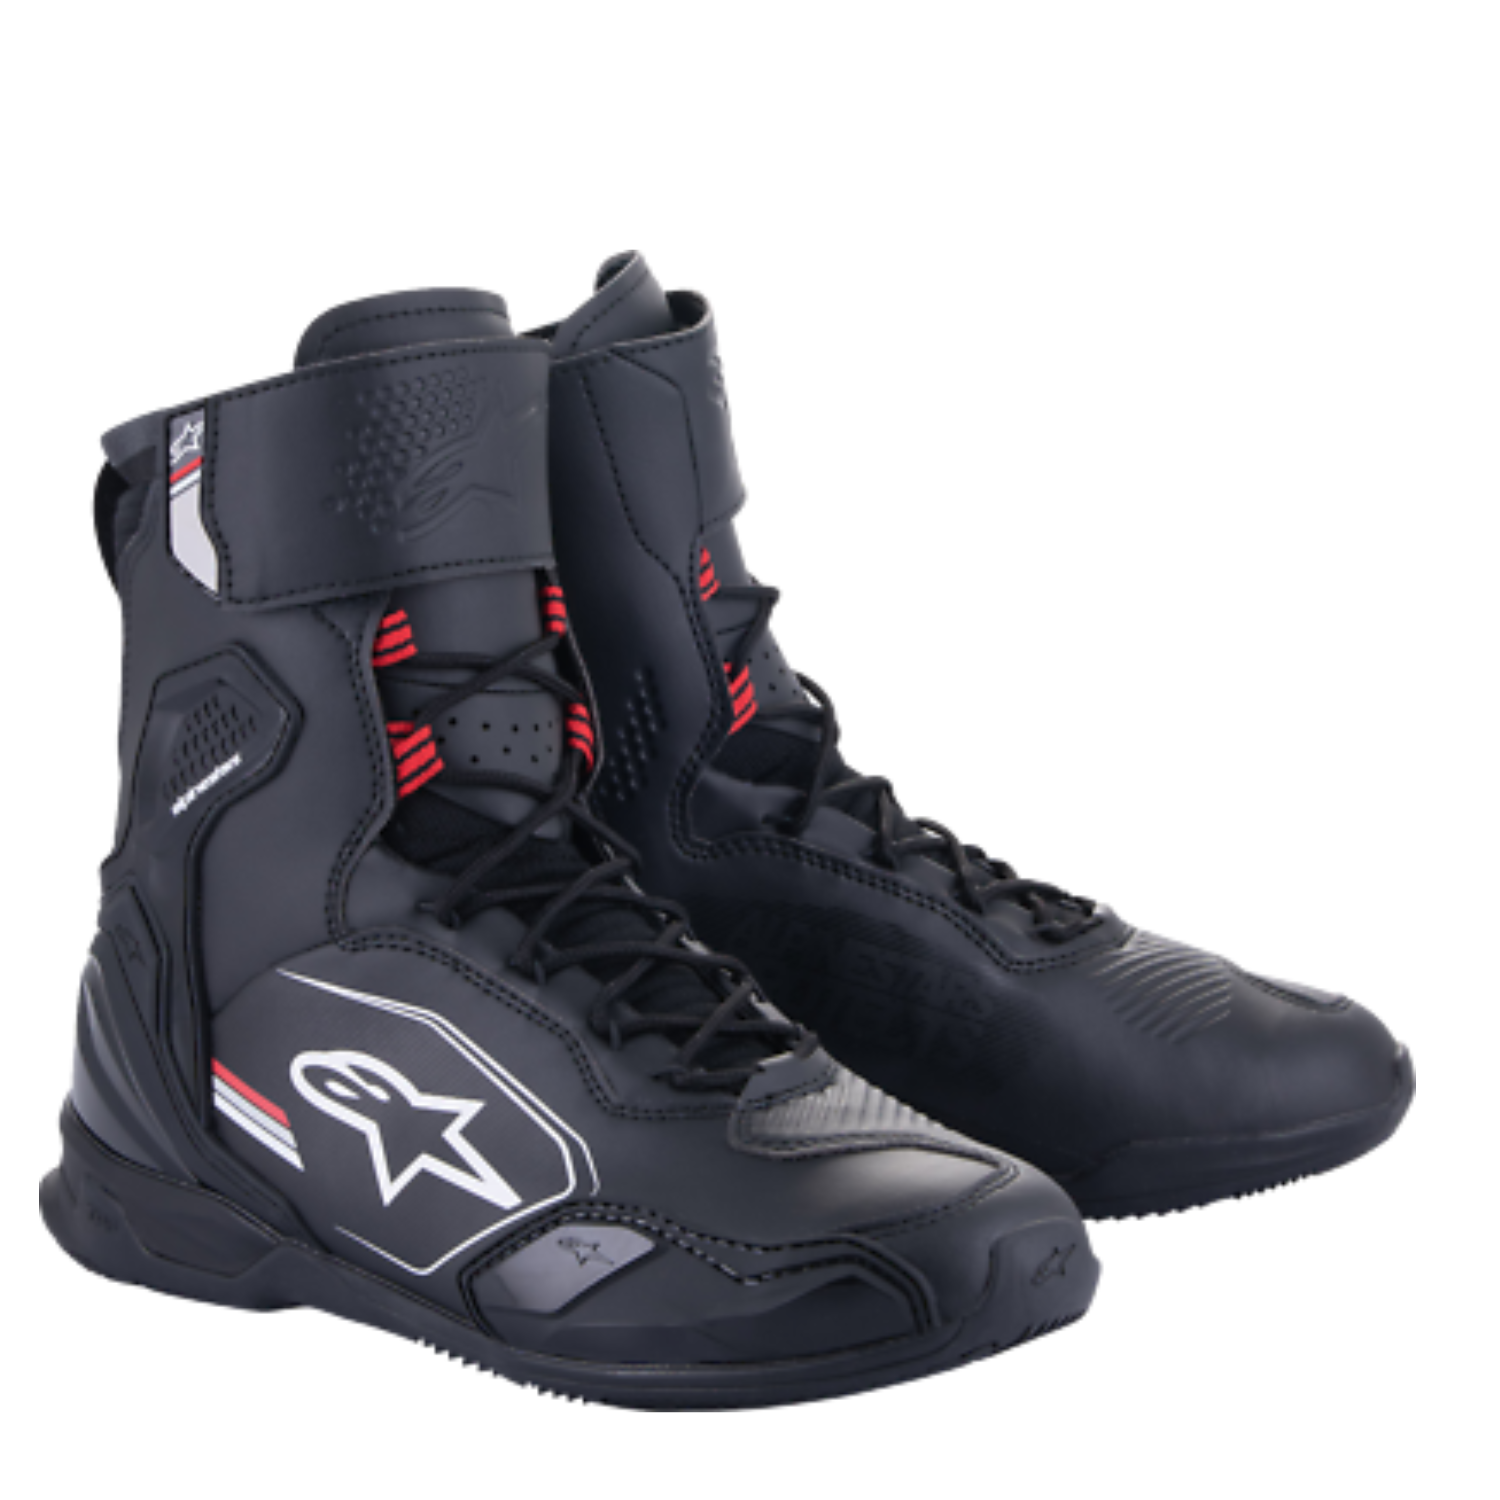 Image of Alpinestars Superfaster Shoes Black Gray Bright Red Size US 11 ID 8059347260839